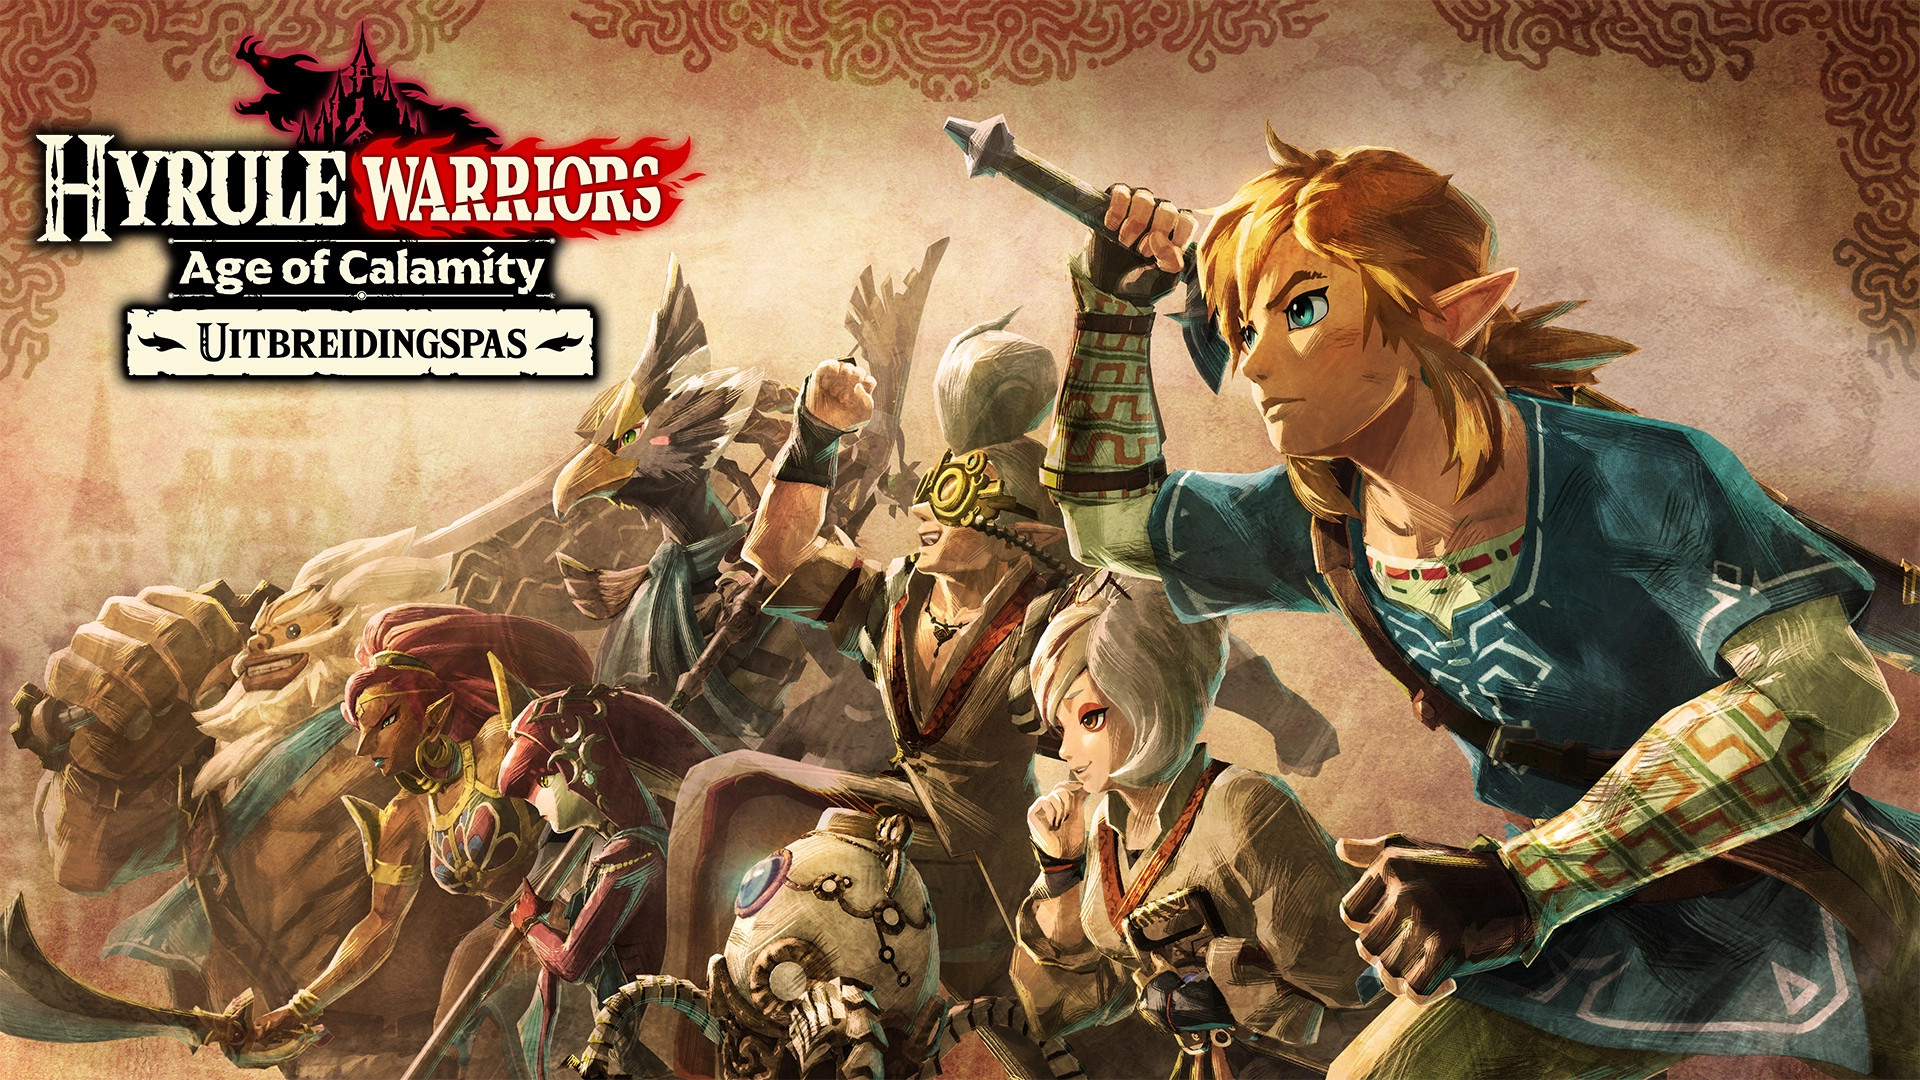 AOC Hyrule Warriors Age of Calamity Expansion Pass DLC (extra content) kopen?